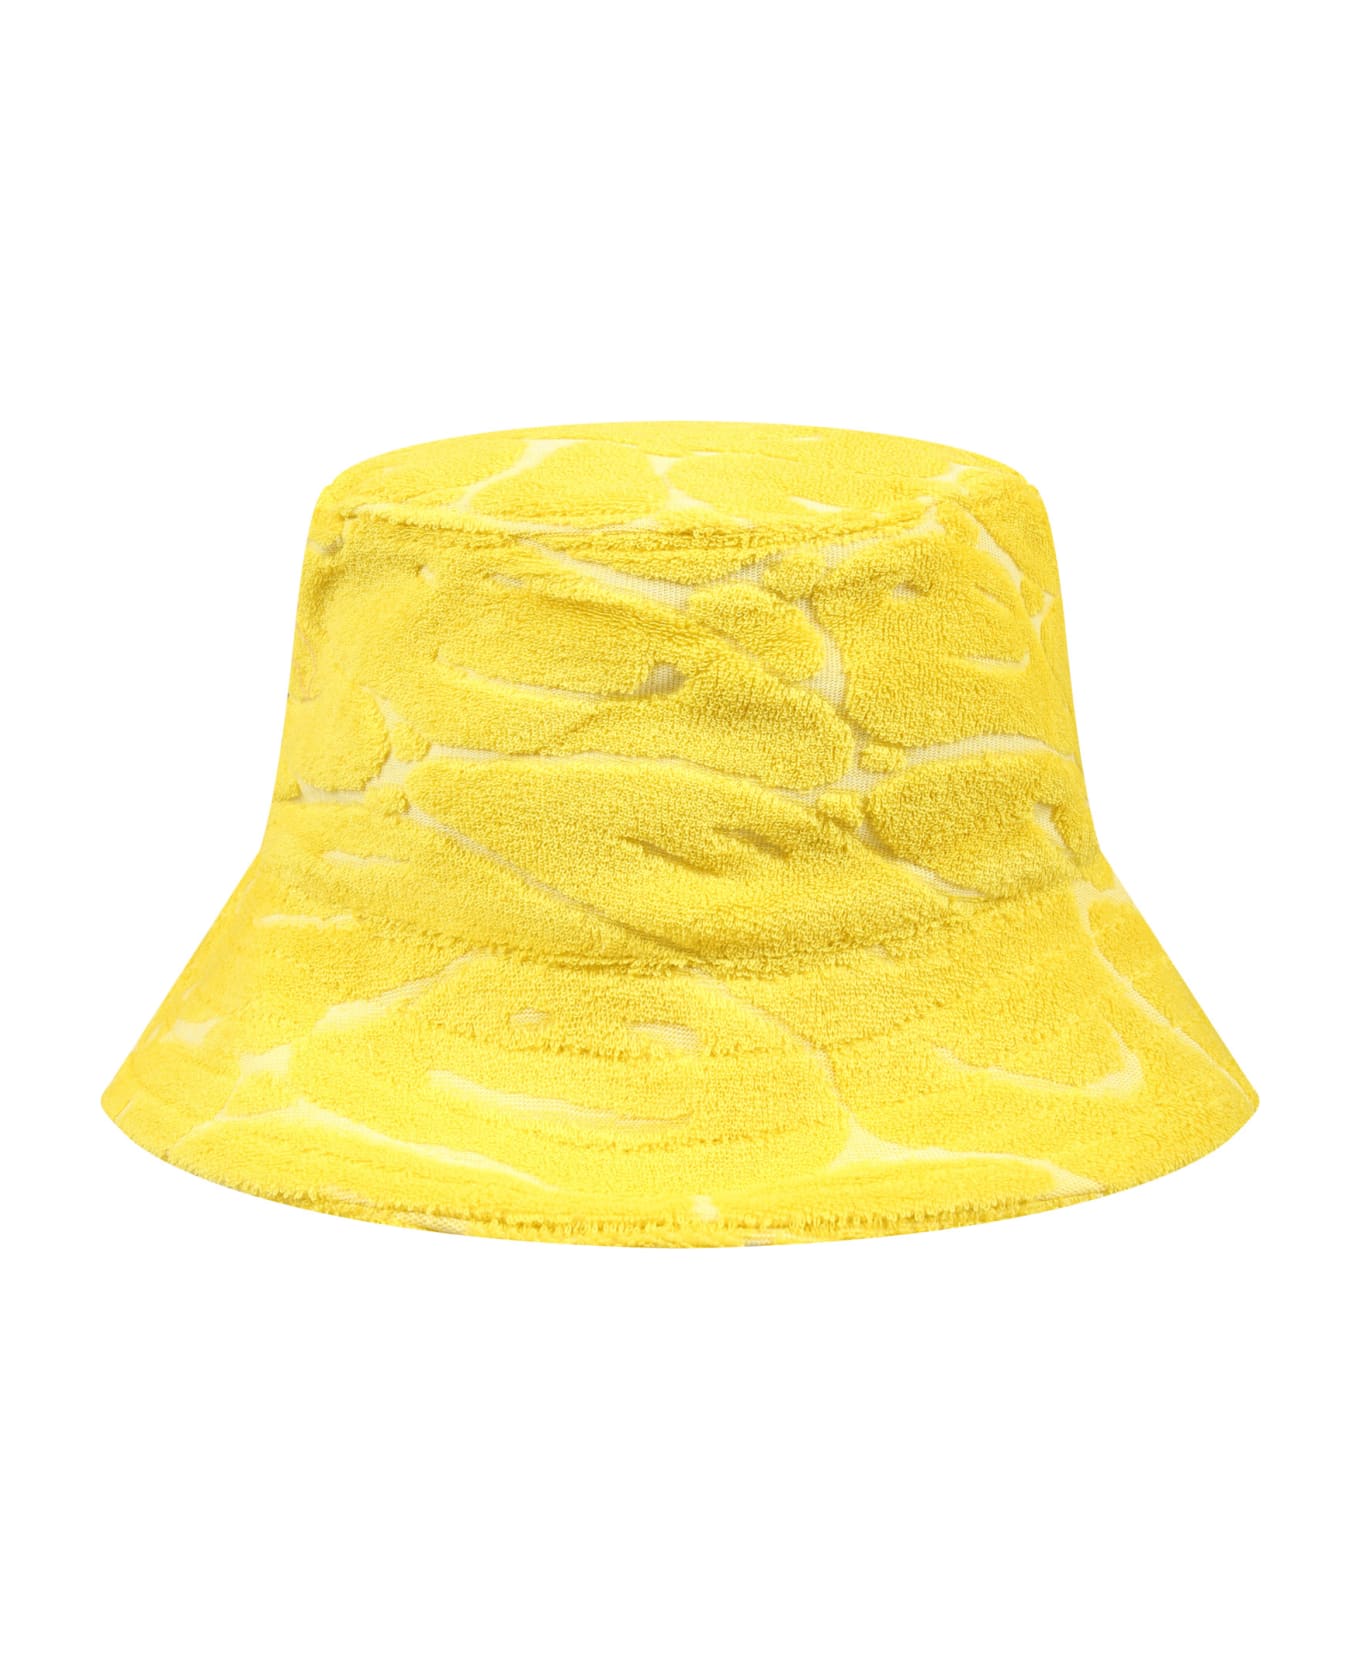 Molo Yellow Cloche For Kids With Smiley - Yellow アクセサリー＆ギフト